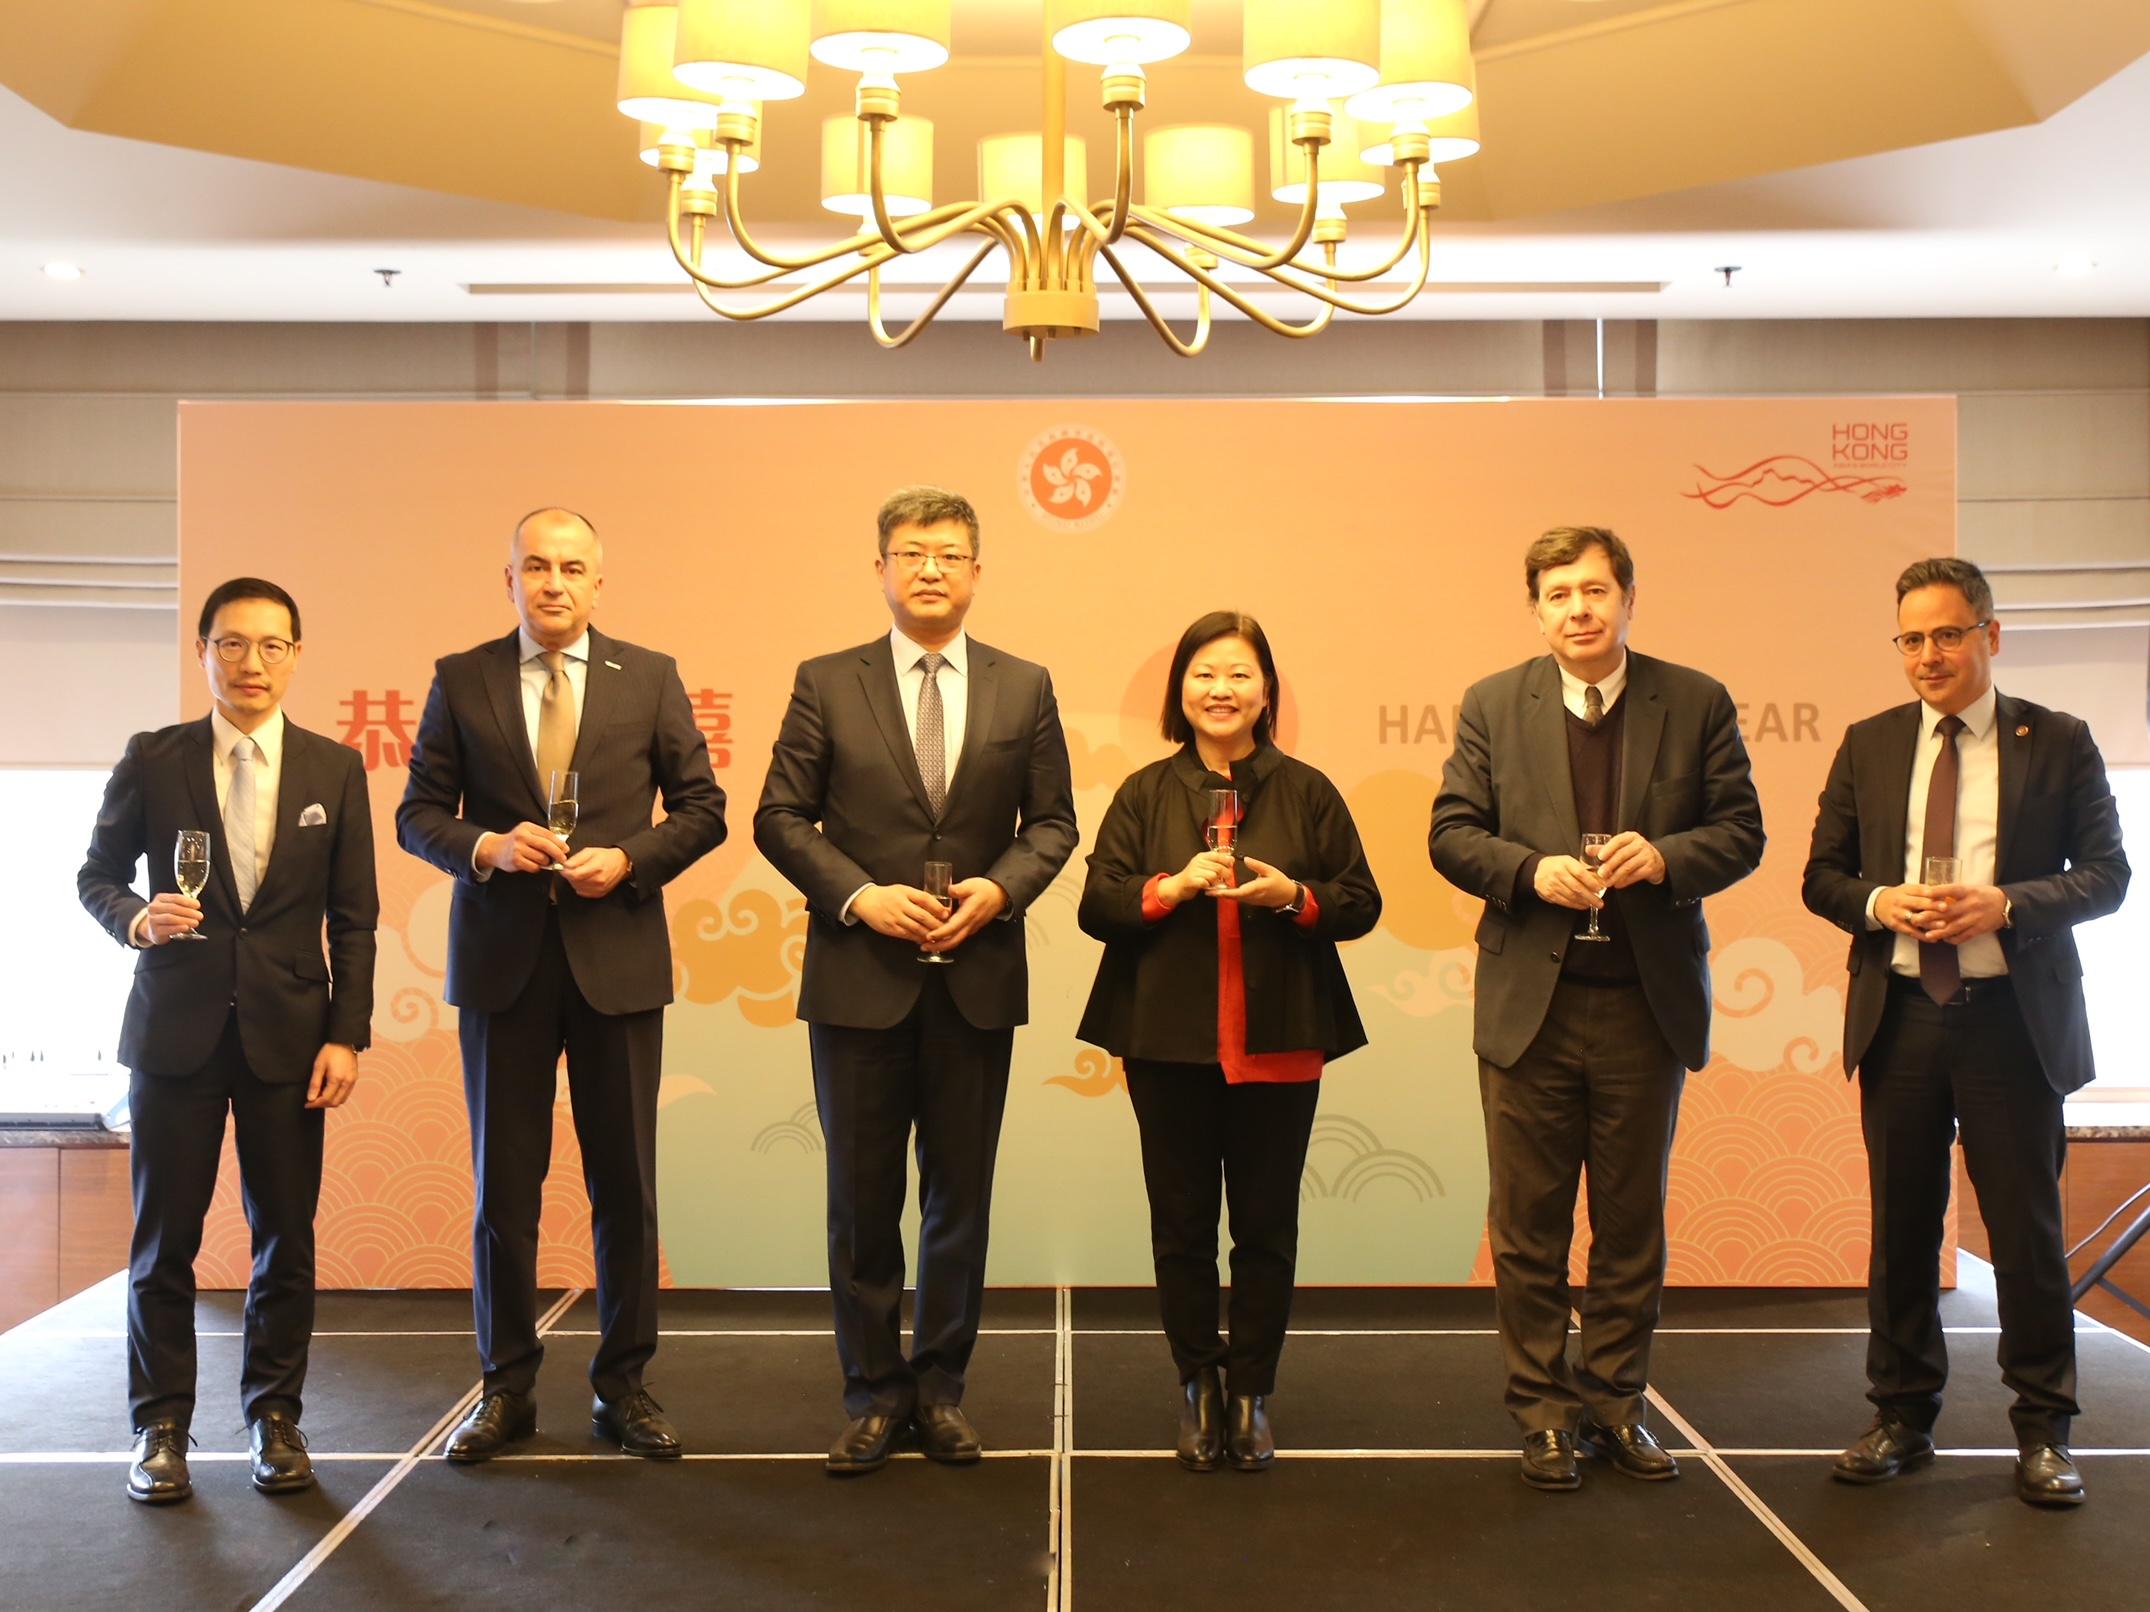 Photo shows (from left) the Regional Director, Europe, Central Asia and Israel, Hong Kong Trade Development Council, Mr Silas Chu; the Chairman of Türkiye-Hong Kong Business Council, DEIK, Mr Murat Kolbaşi; Chinese Embassy in Türkiye Minister Cong Shong; the Special Representative for Hong Kong Economic and Trade Affairs to the European Union (EU), Ms Shirley Yung; the Deputy Director General (International Agreements and EU), Ministry of Trade of Türkiye, Mr Atilla Bastirmaci; and the Head of Asia Pacific Department, Ministry of Trade of Türkiye, Mr Çağatay Özden, toasting at the Chinese New Year reception in Ankara, Türkiye on February 15 (Ankara time).